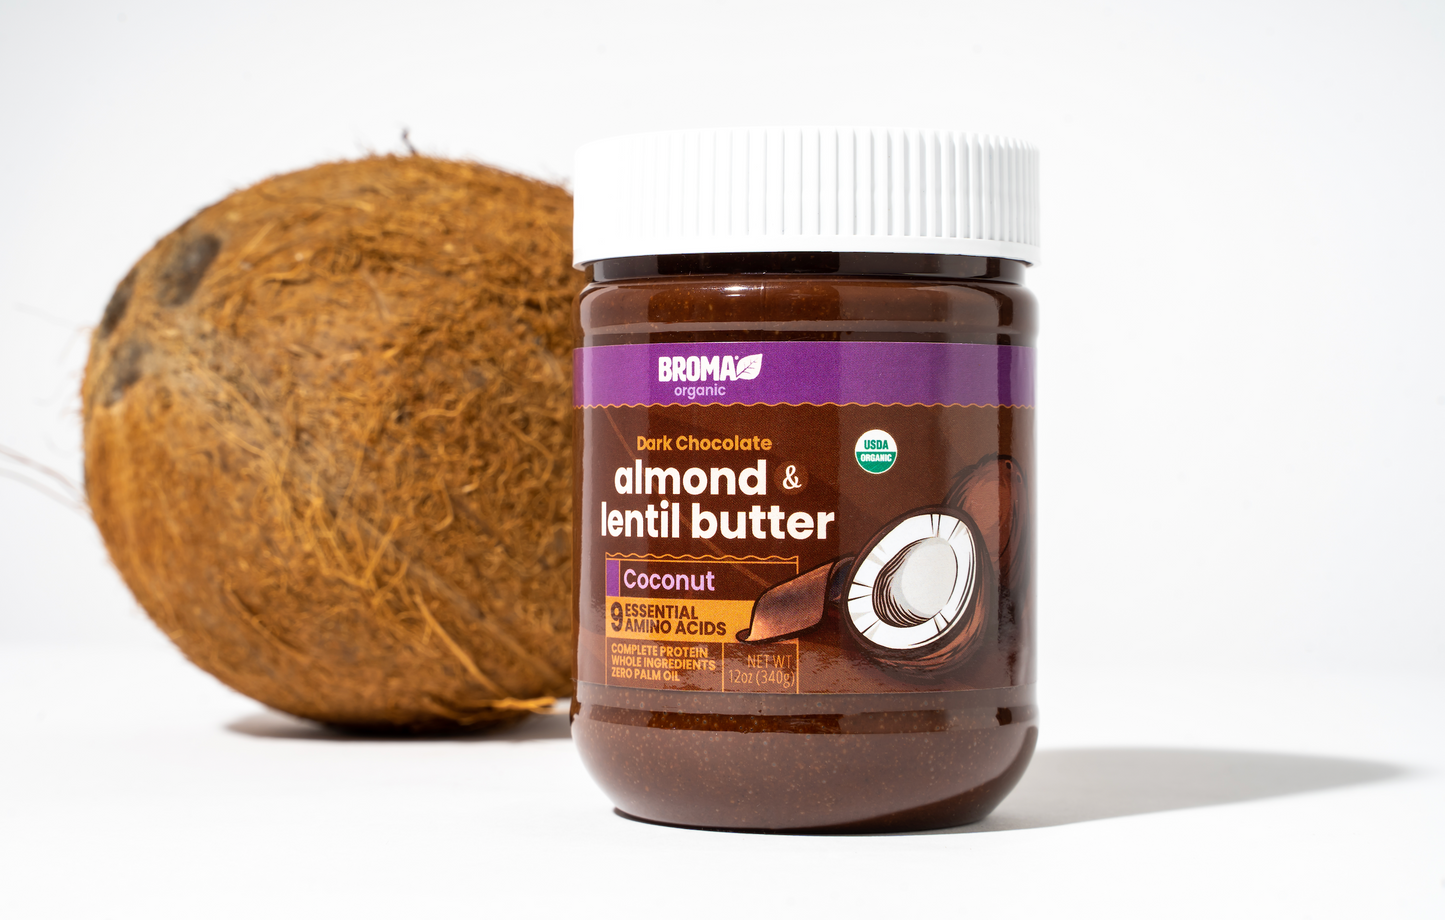 Dark Chocolate Coconut Almond & Lentil Butter - The First Complete Protein Nut Butter